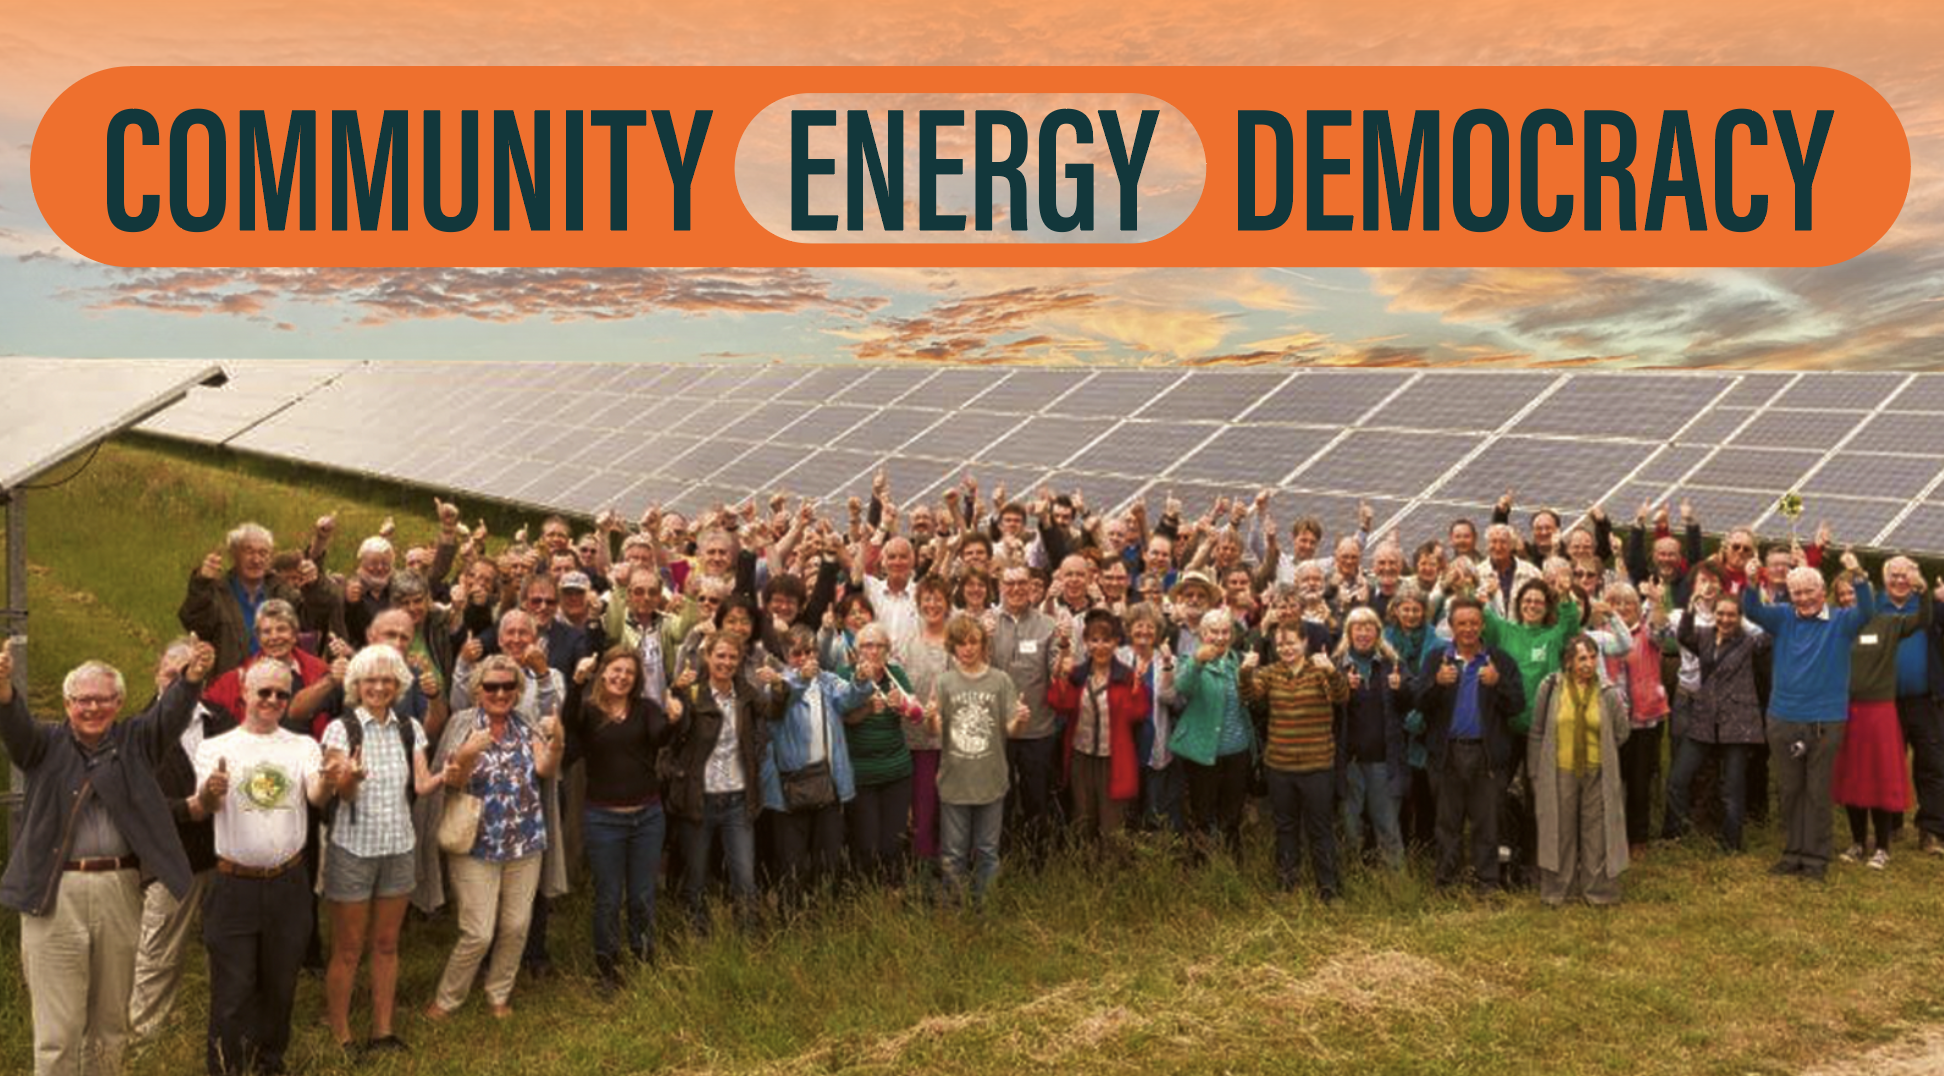 Text on top says: Community Energy Democracy with a community cheering. Behind them is a lager solar farm and with beautiful sunset in the background.